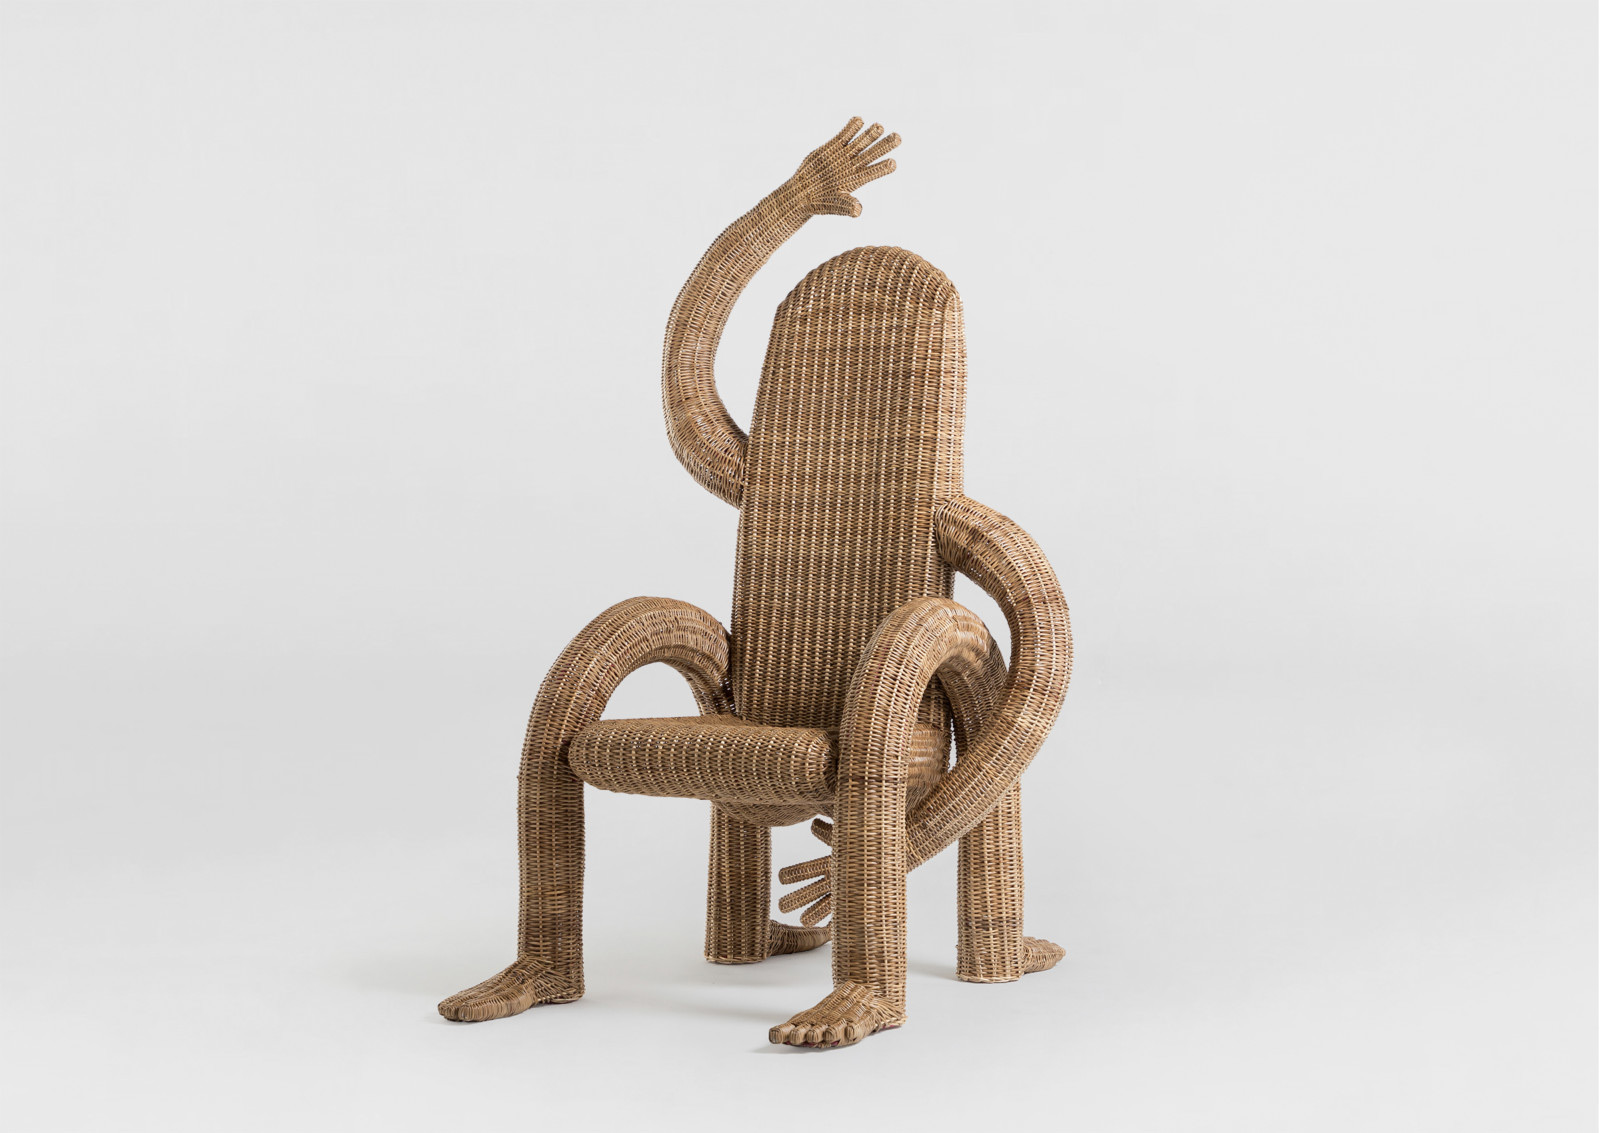 Playful Chairs Designed by Chris Wolston Impersonate the Humans Who Sit on Them